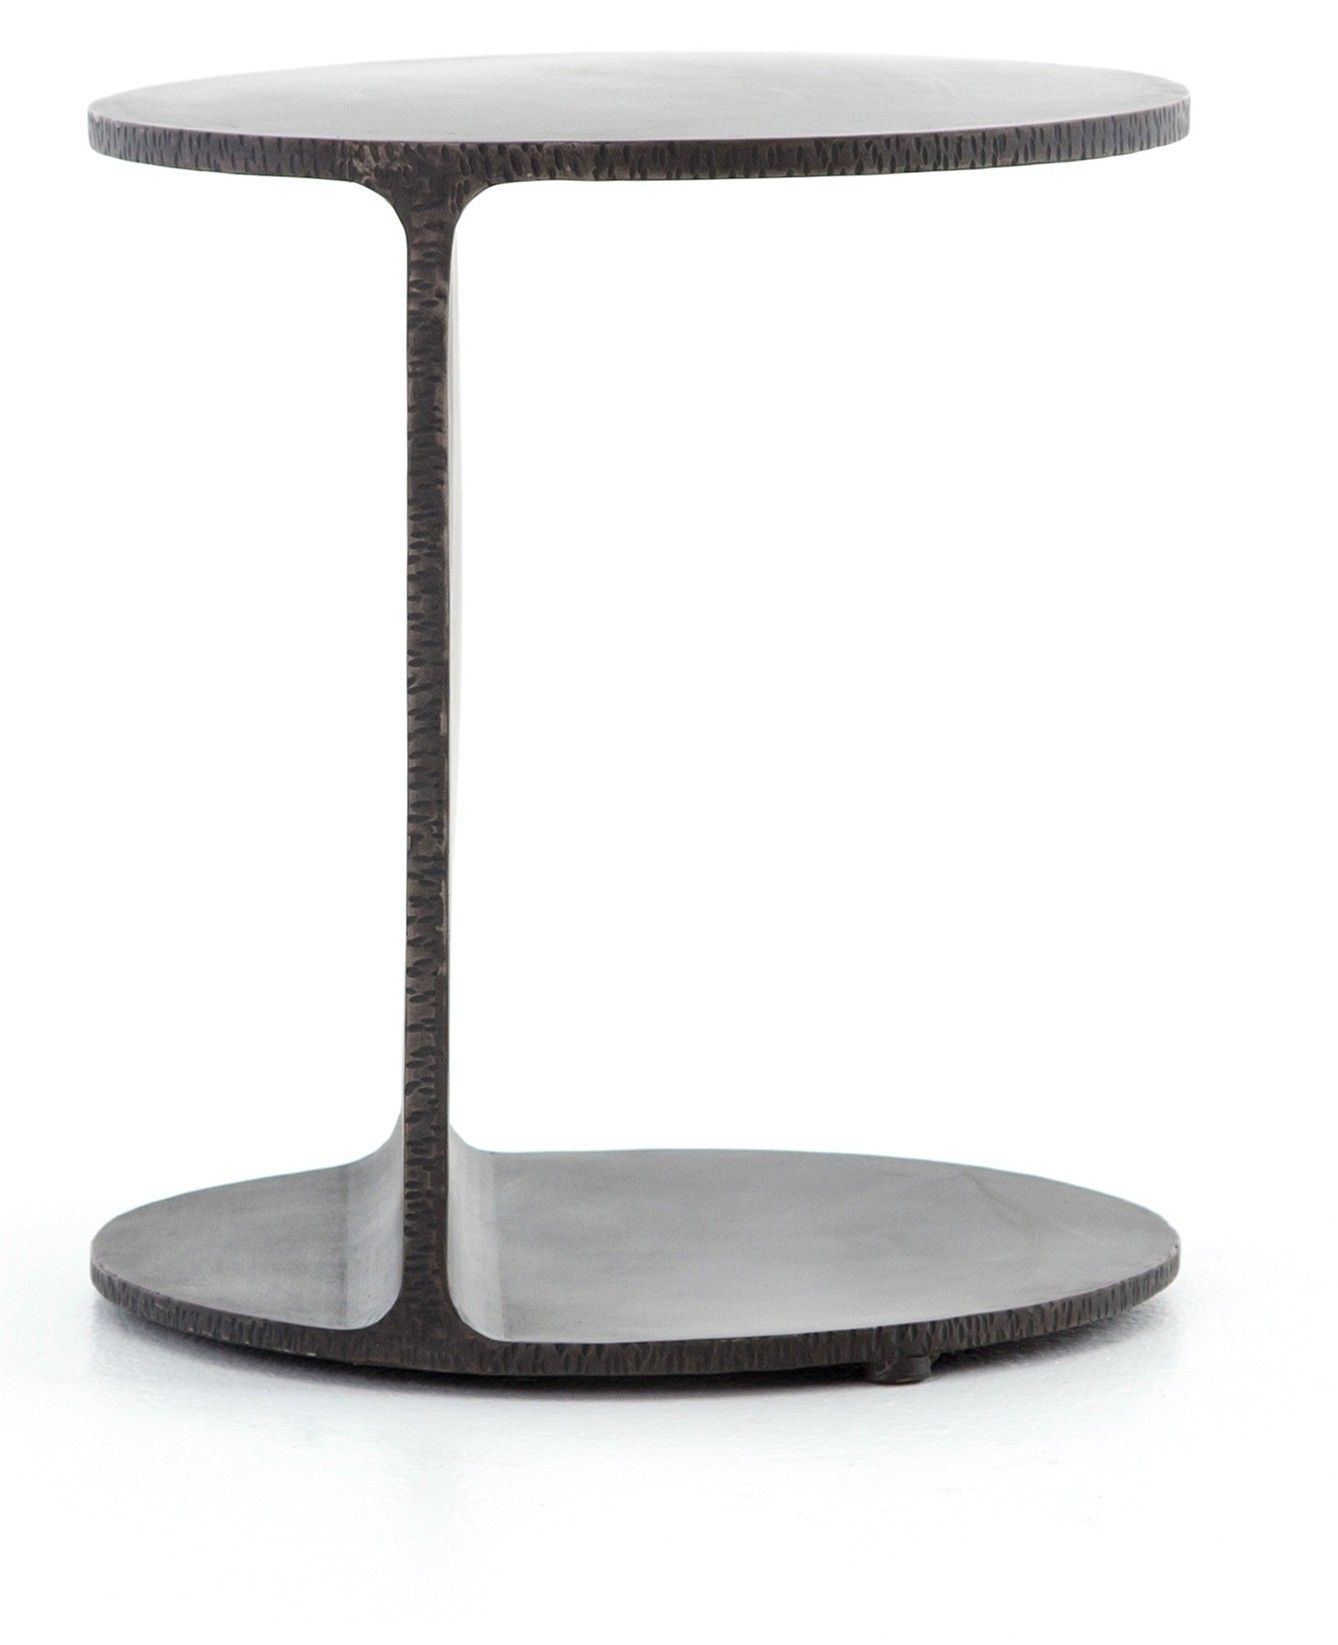 Illy Side Table In 2021 | Side Table, Black Side Table, Metal Side Table With Regard To Metal Side Tables For Living Spaces (Gallery 4 of 20)